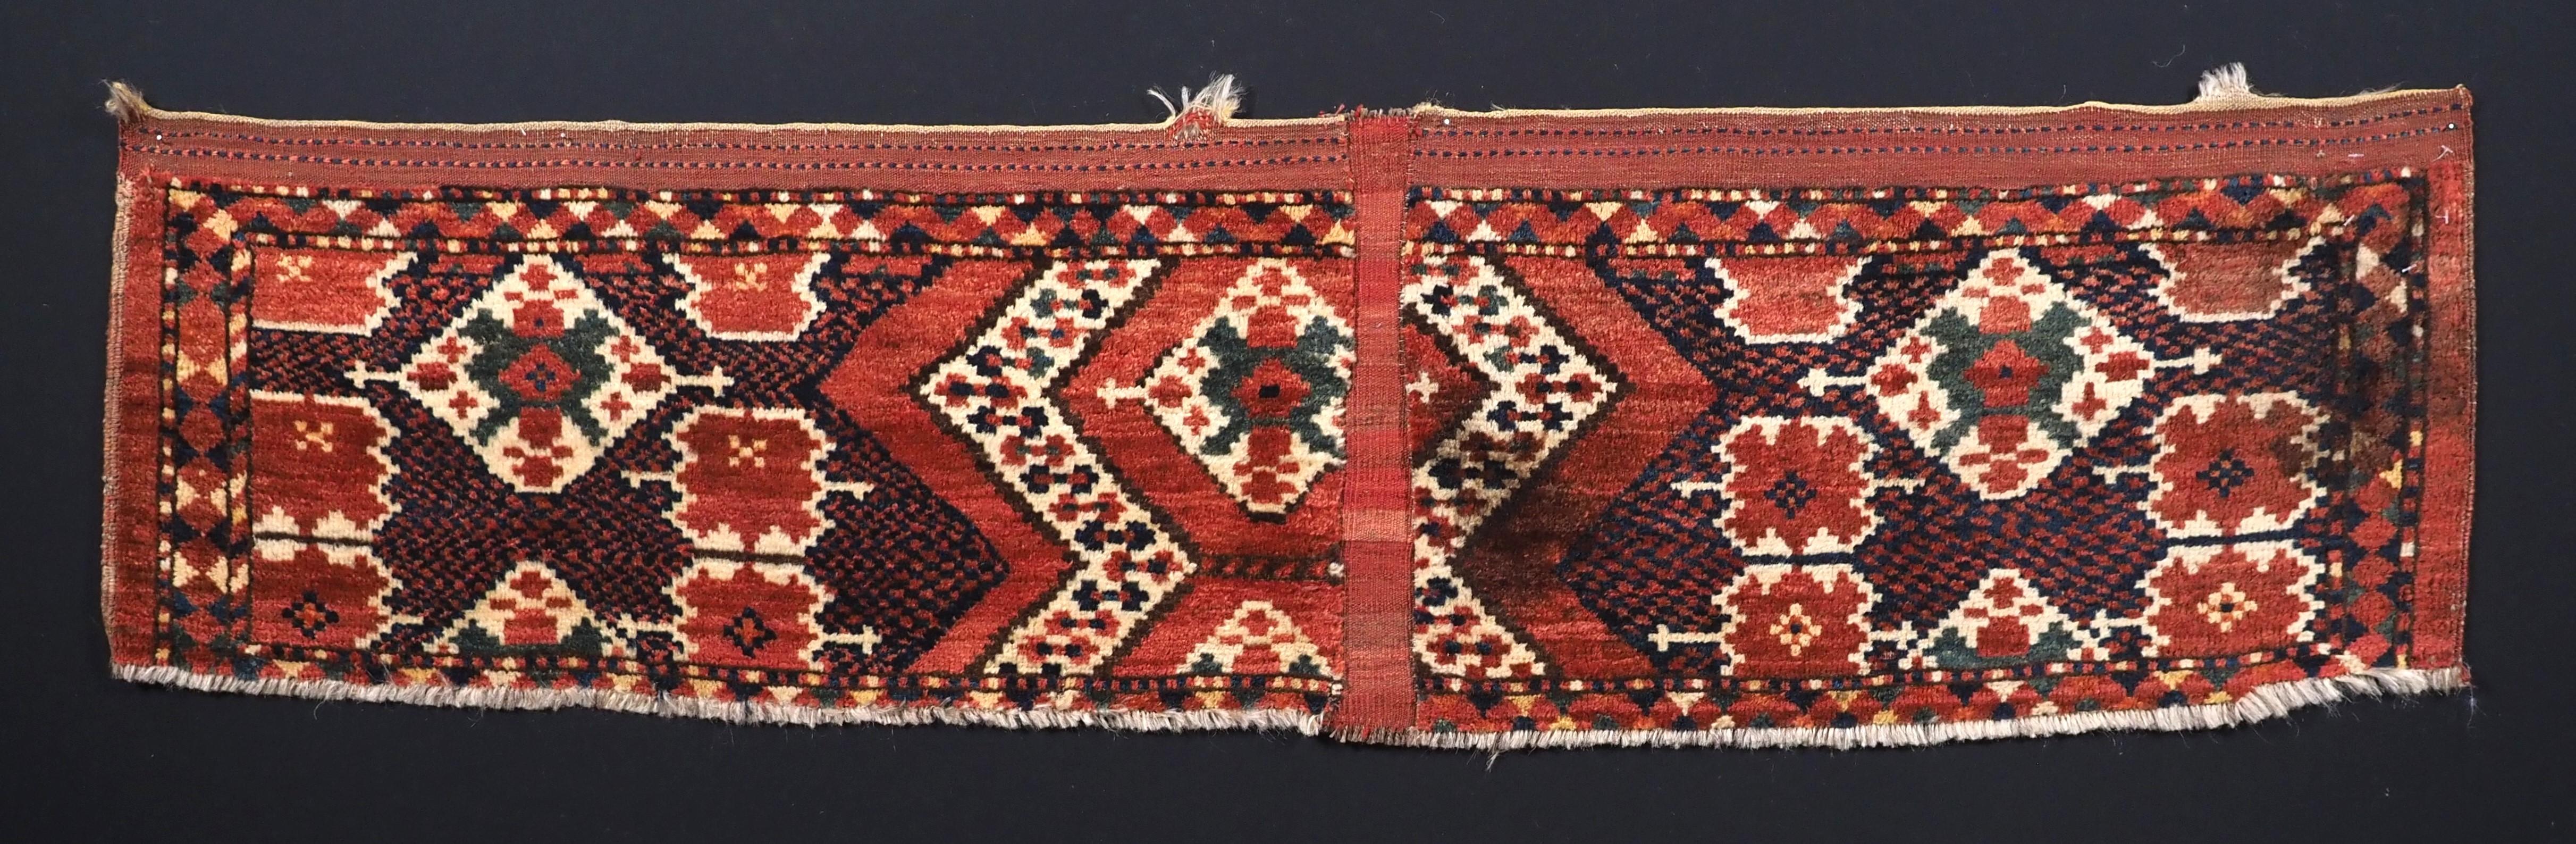 Size: 5ft 2in x 1ft 4in (157 x 41cm)

Antique Ersari Beshir Turkmen torba with ikat design.

Circa 1880.

Torba are shallow wall bags used mainly in tents or yurts for the storage of personal belongings, they were also used to decorate the sides of